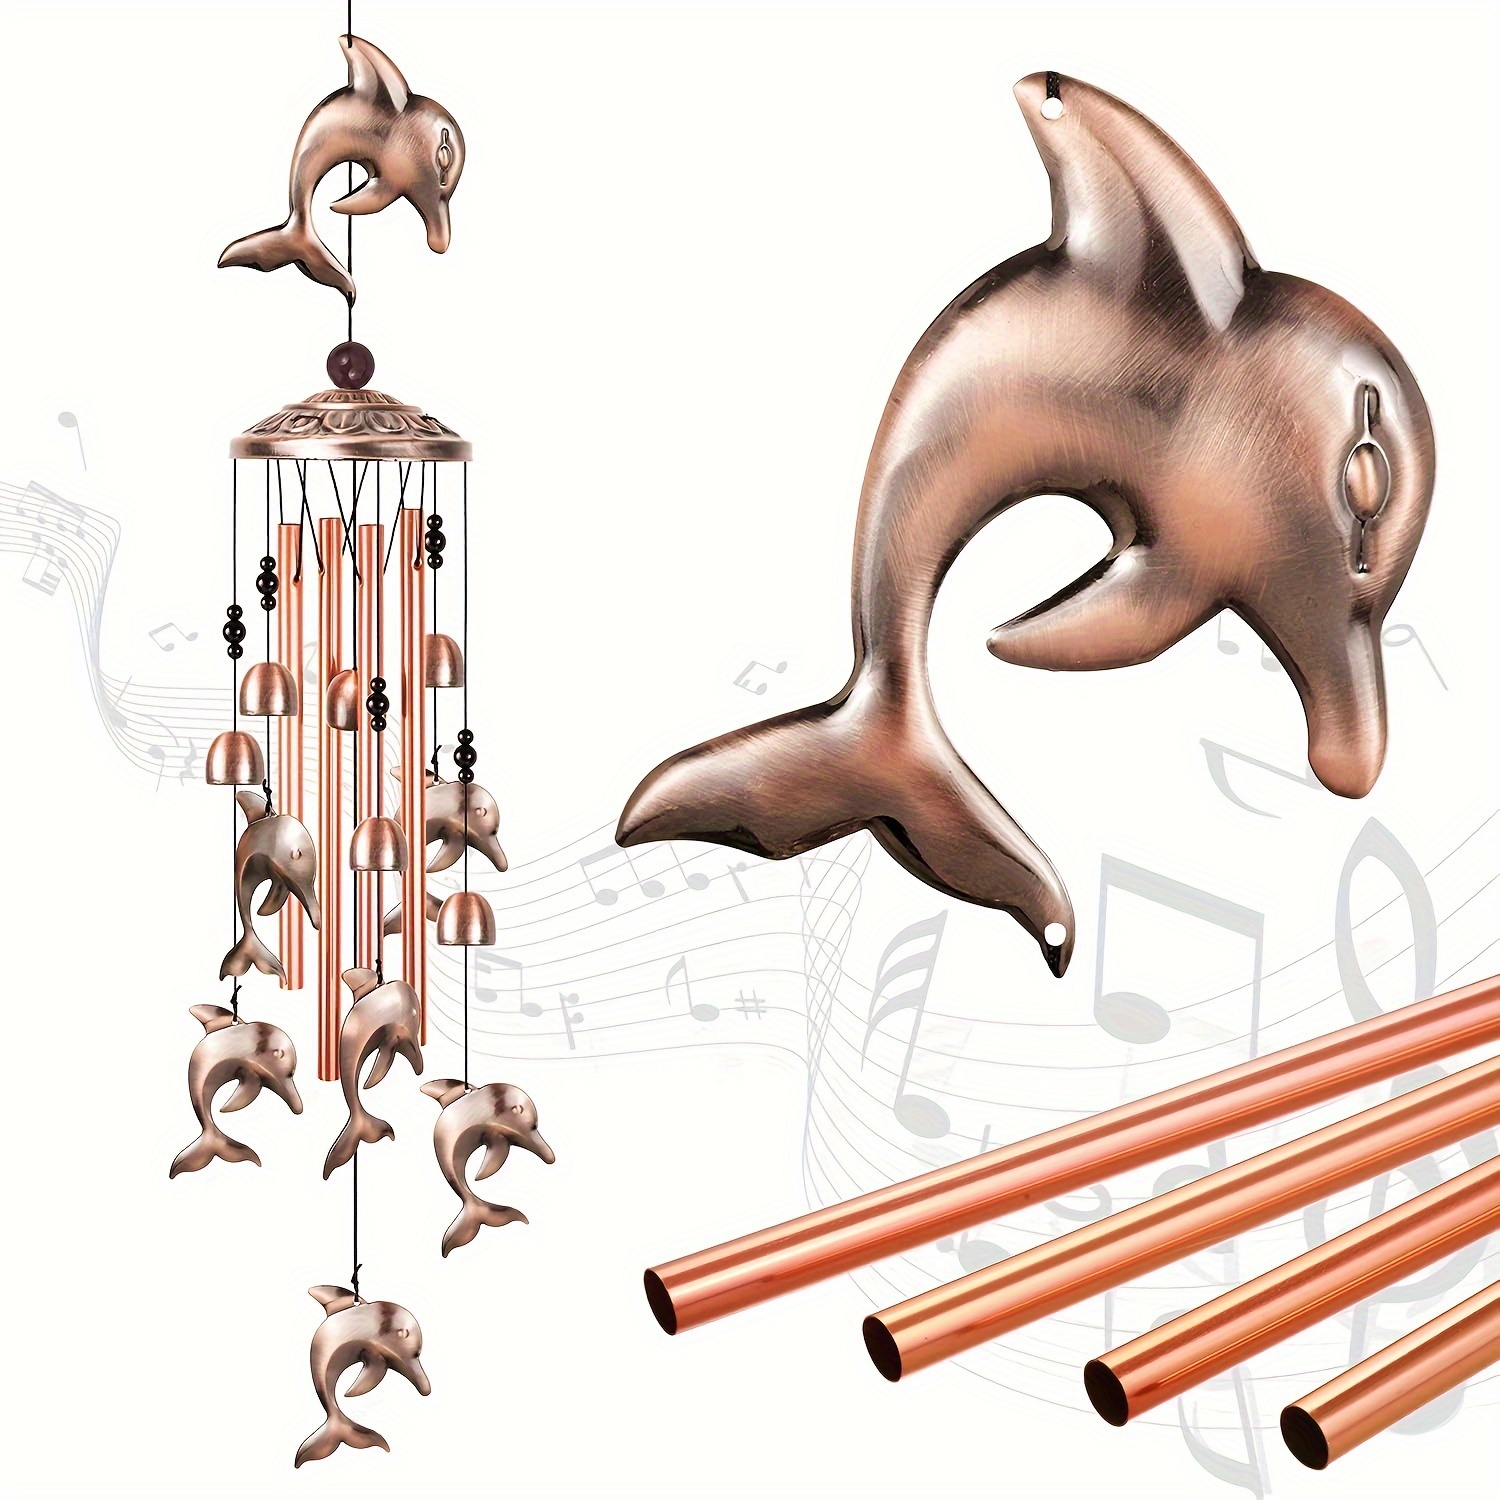 27 Dolphin wind chimes ideas